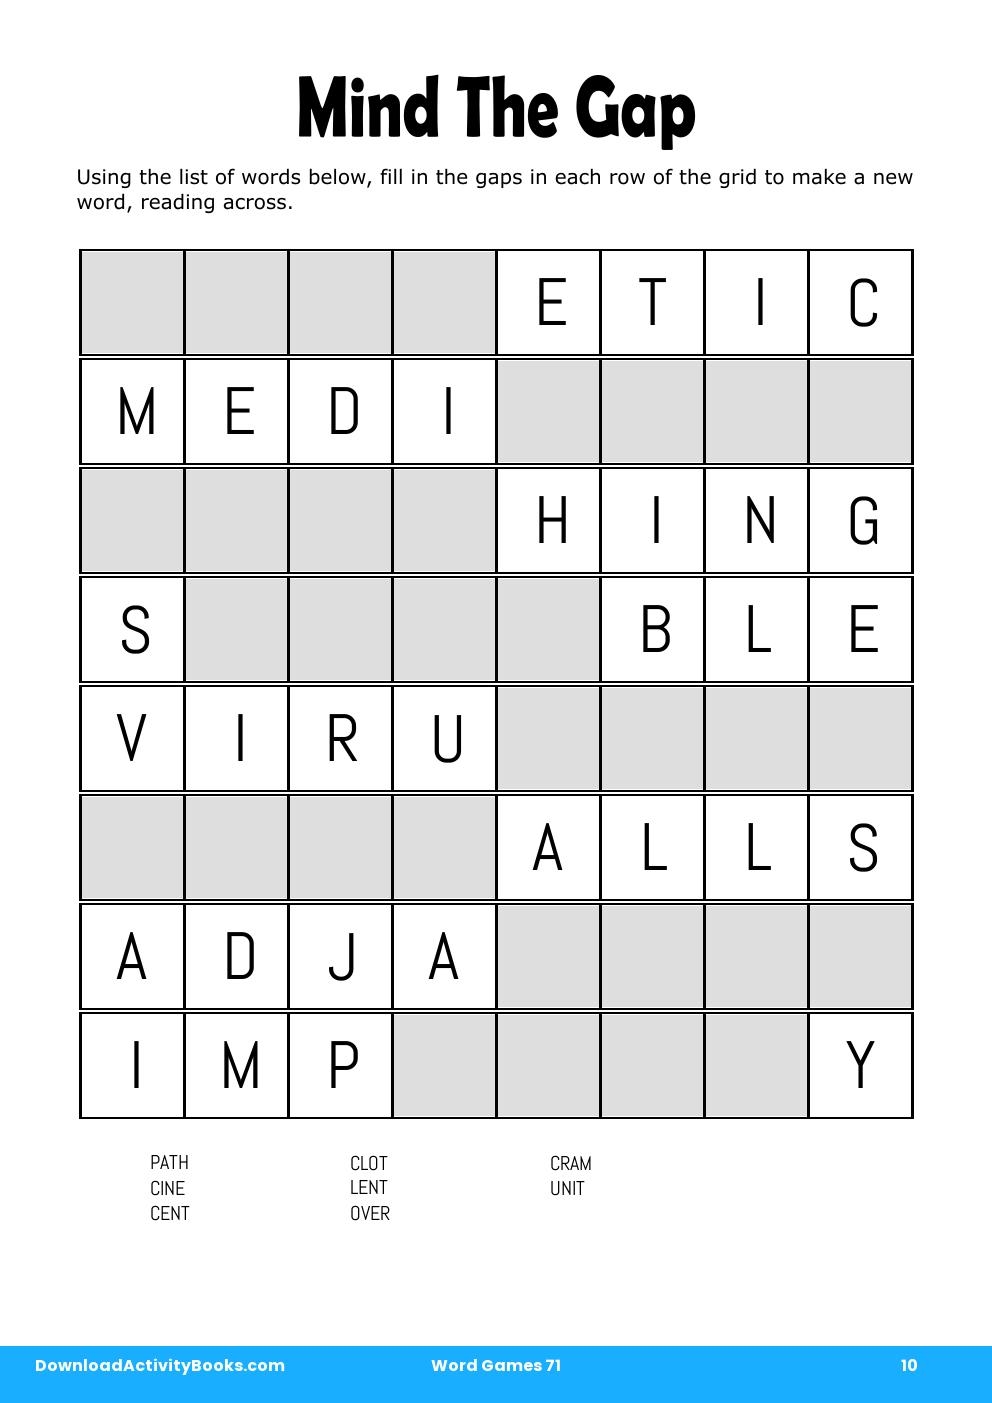 Mind The Gap in Word Games 71